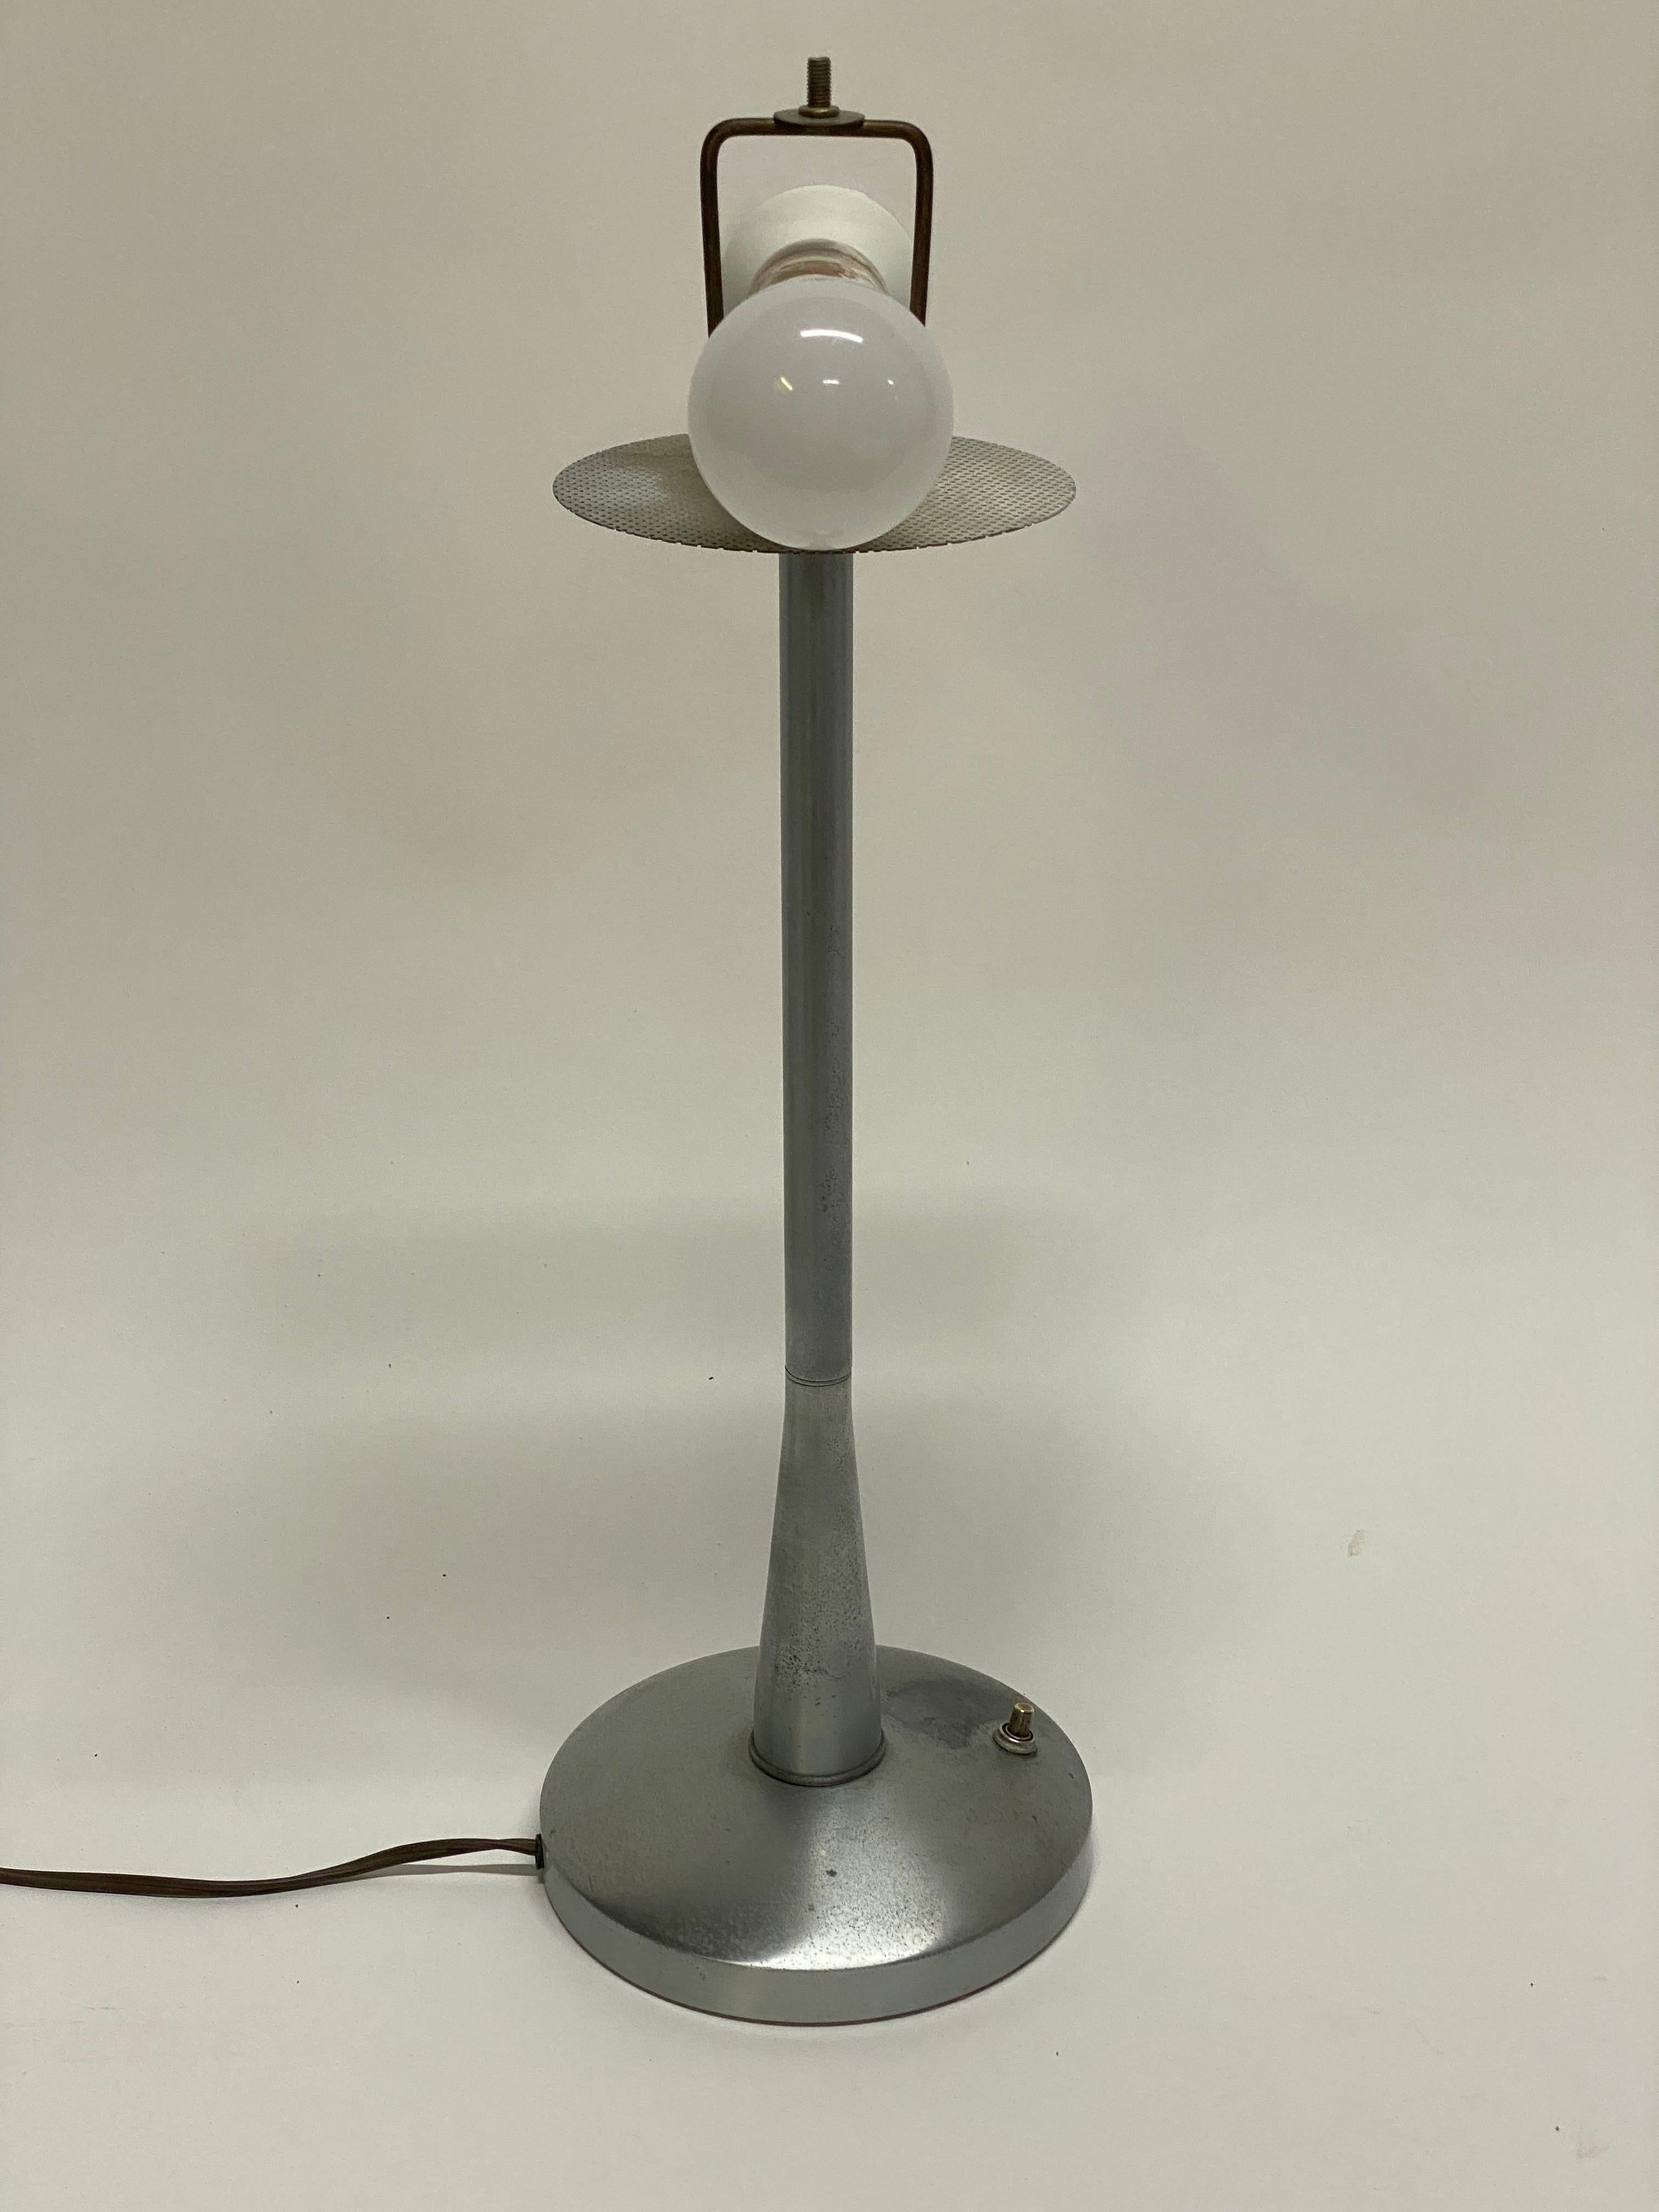 Mutual Sunset Aluminum Machine Age Table Lamp In Good Condition For Sale In Garnerville, NY